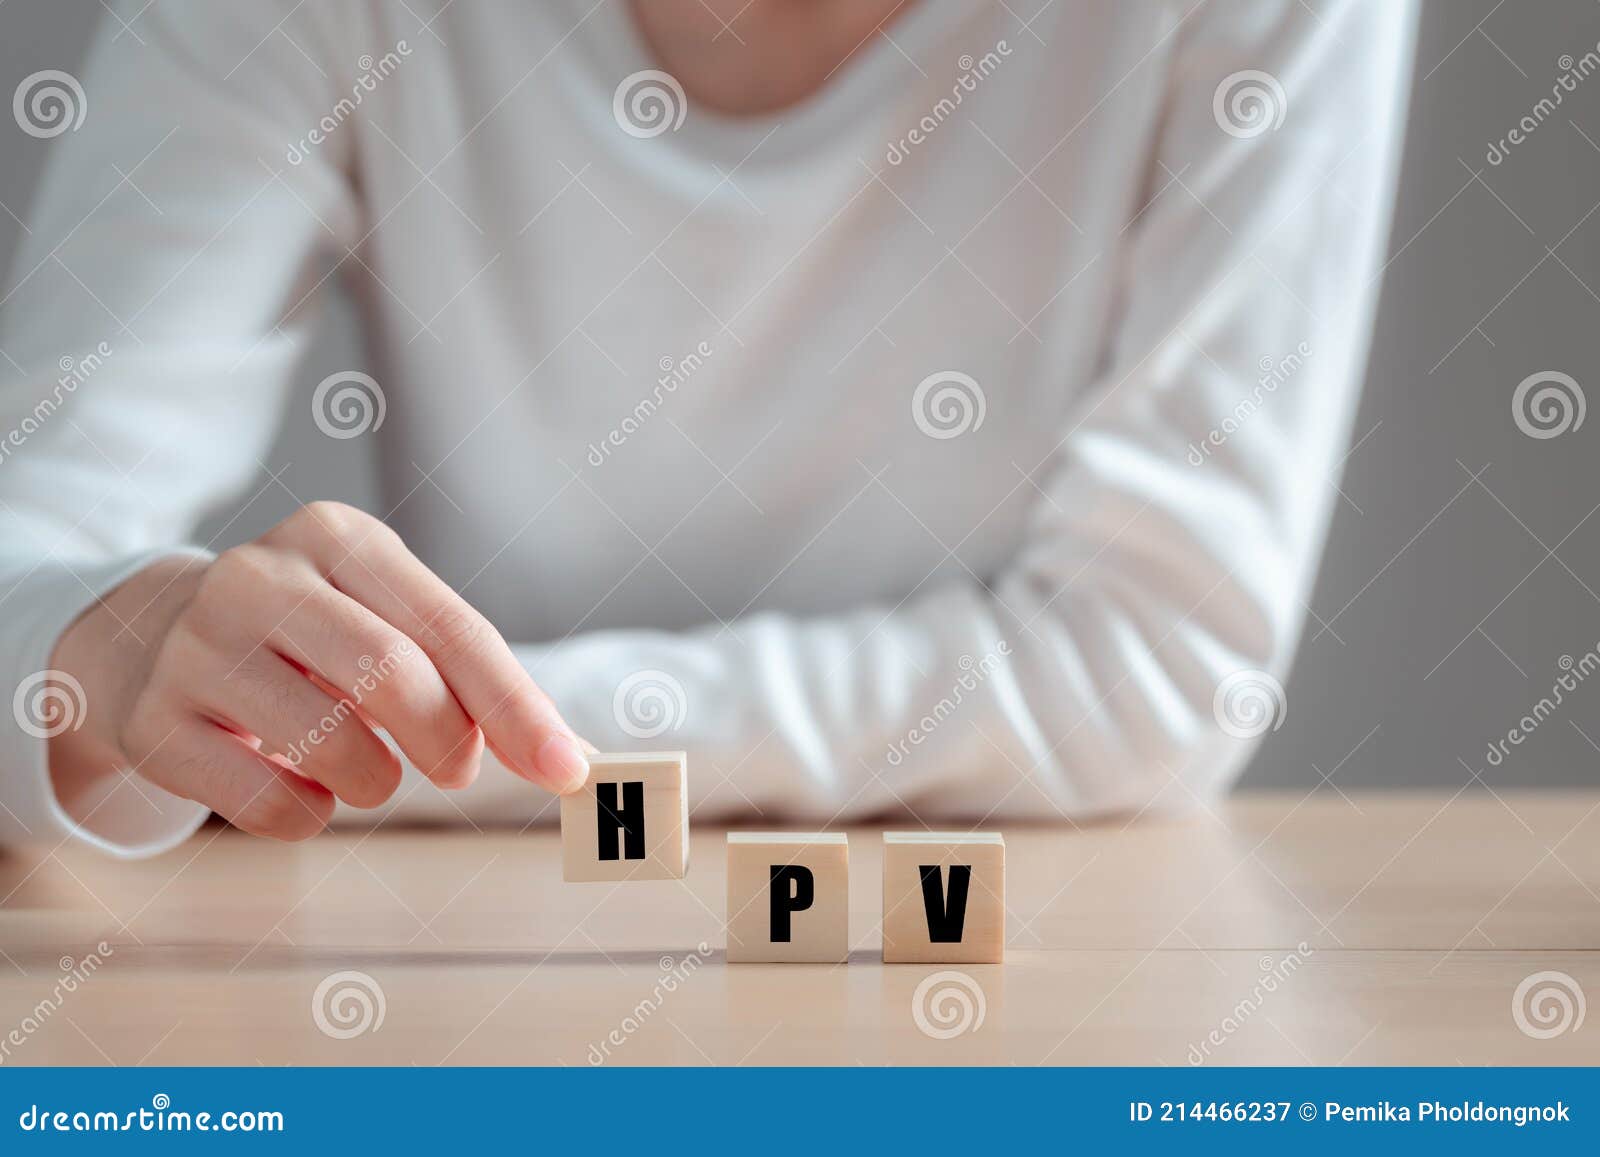 hpv human papillomavirus acronym on wood block, asian woman  holding wooden block, viruses some strains infect genitals and can